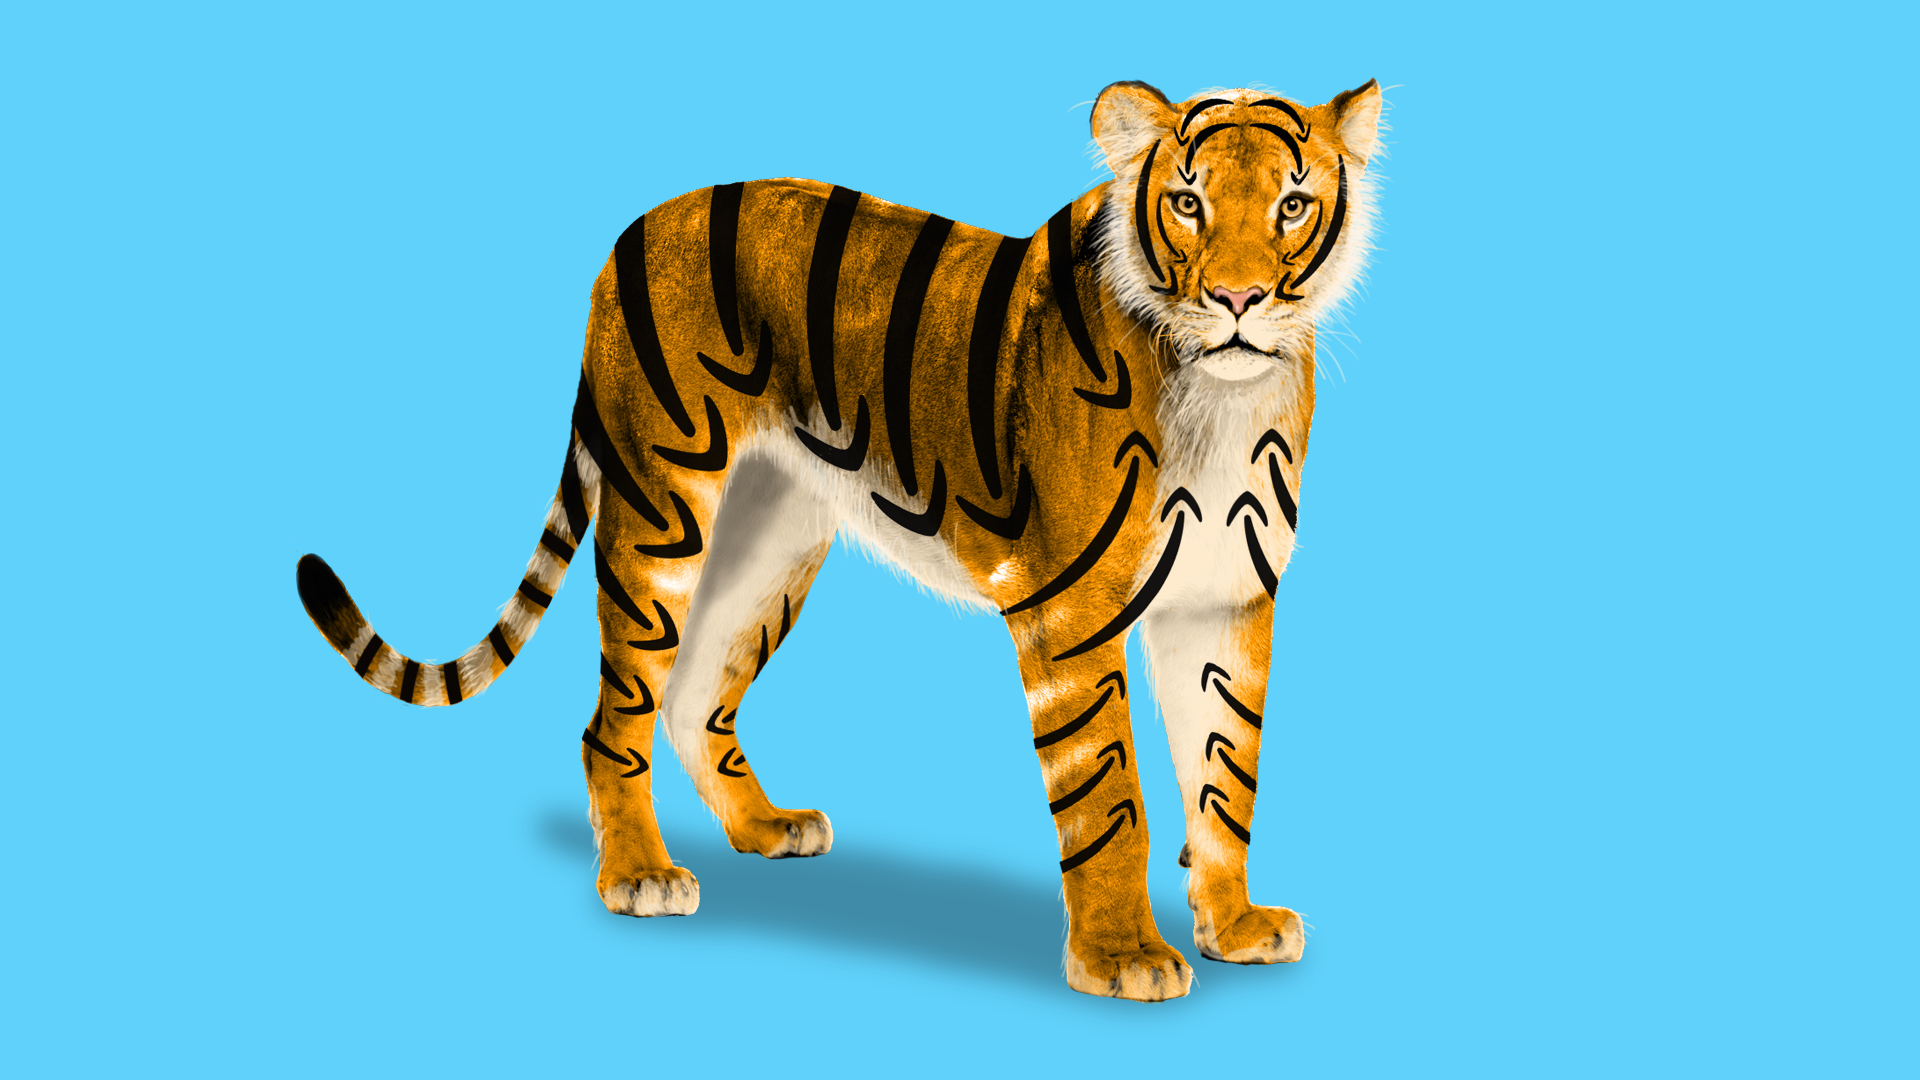 A tiger with Amazon arrows on its coat